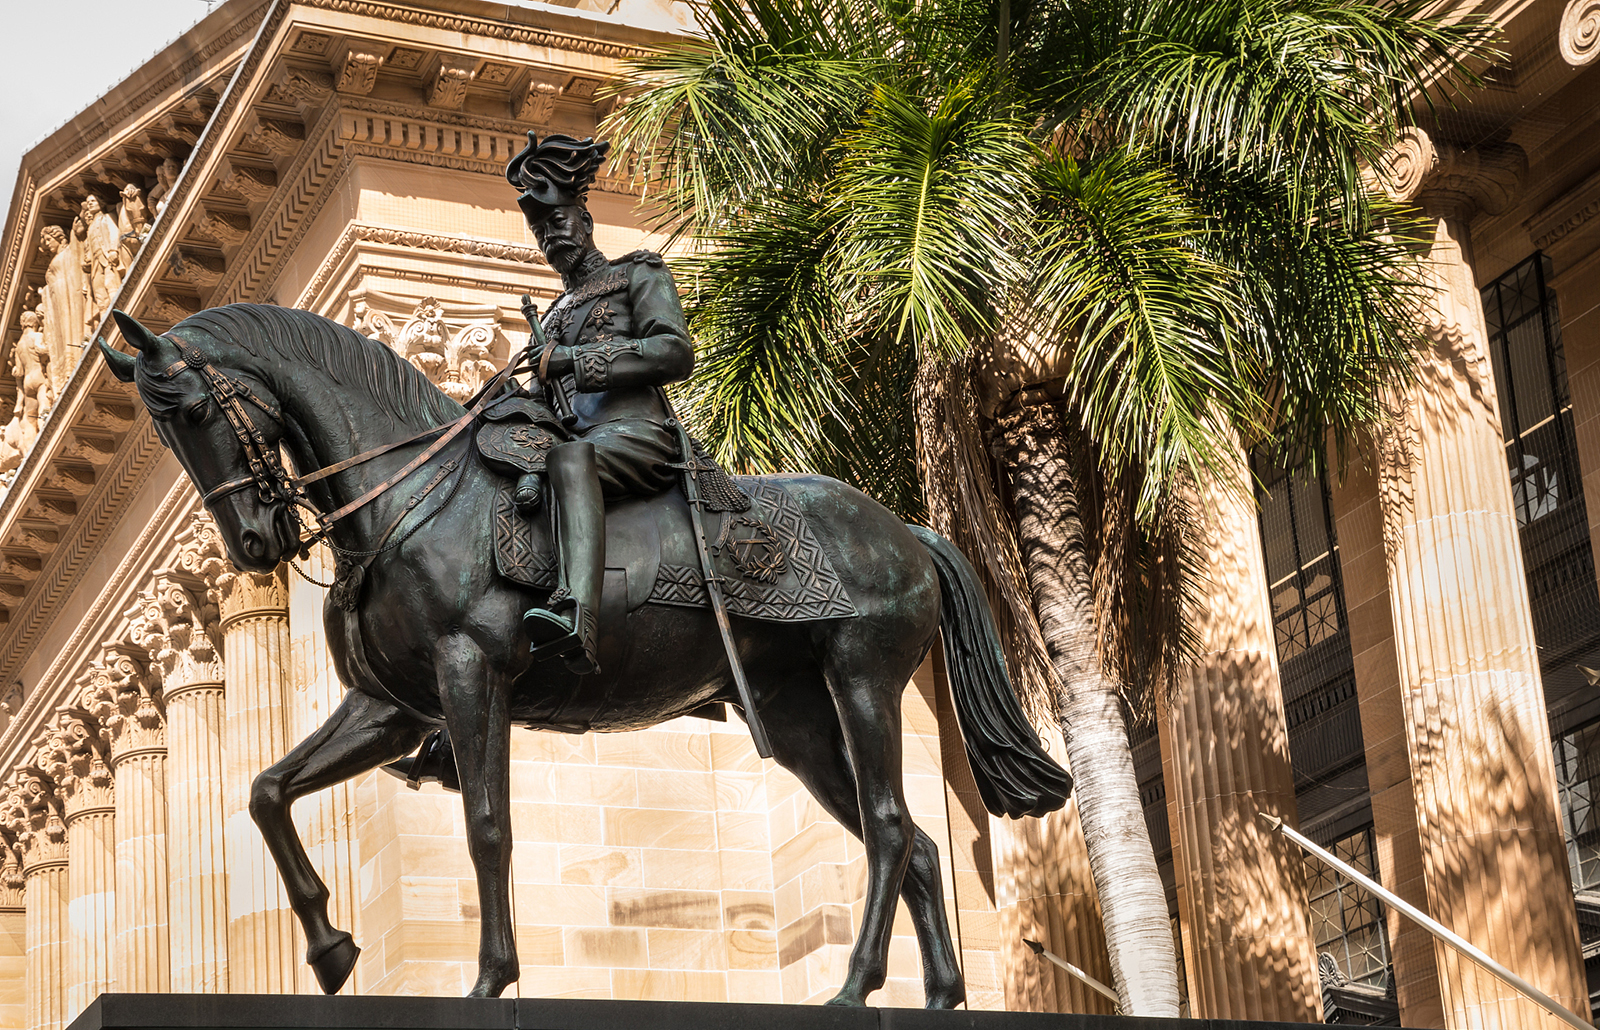 The statue of King George V in front of City Hall of Brisbane, Australia. /CFP